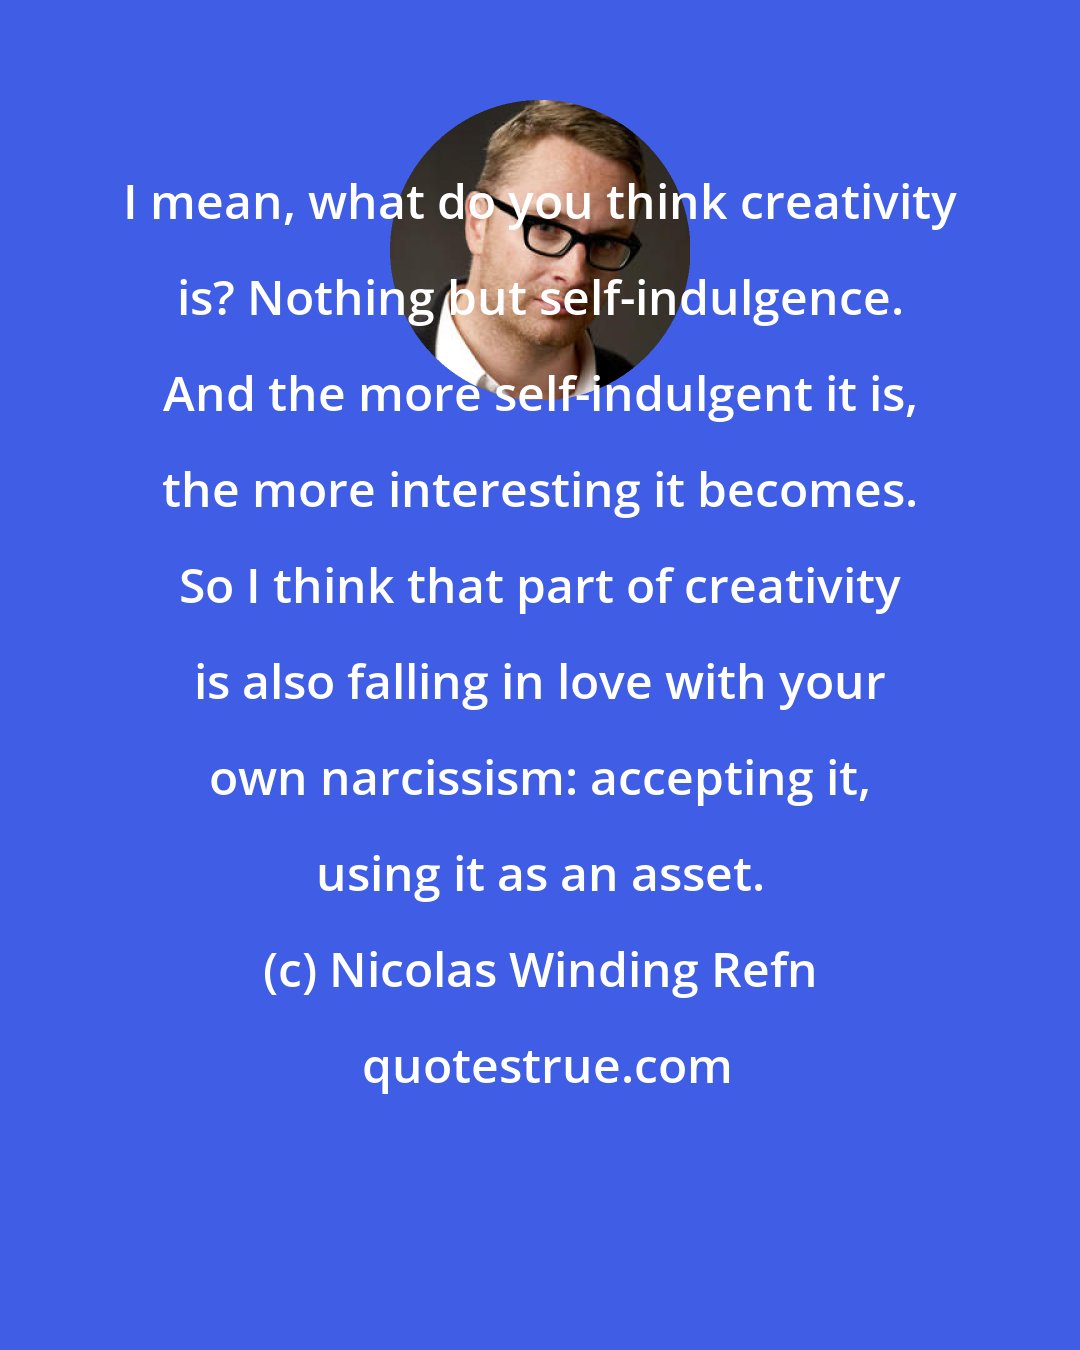 Nicolas Winding Refn: I mean, what do you think creativity is? Nothing but self-indulgence. And the more self-indulgent it is, the more interesting it becomes. So I think that part of creativity is also falling in love with your own narcissism: accepting it, using it as an asset.